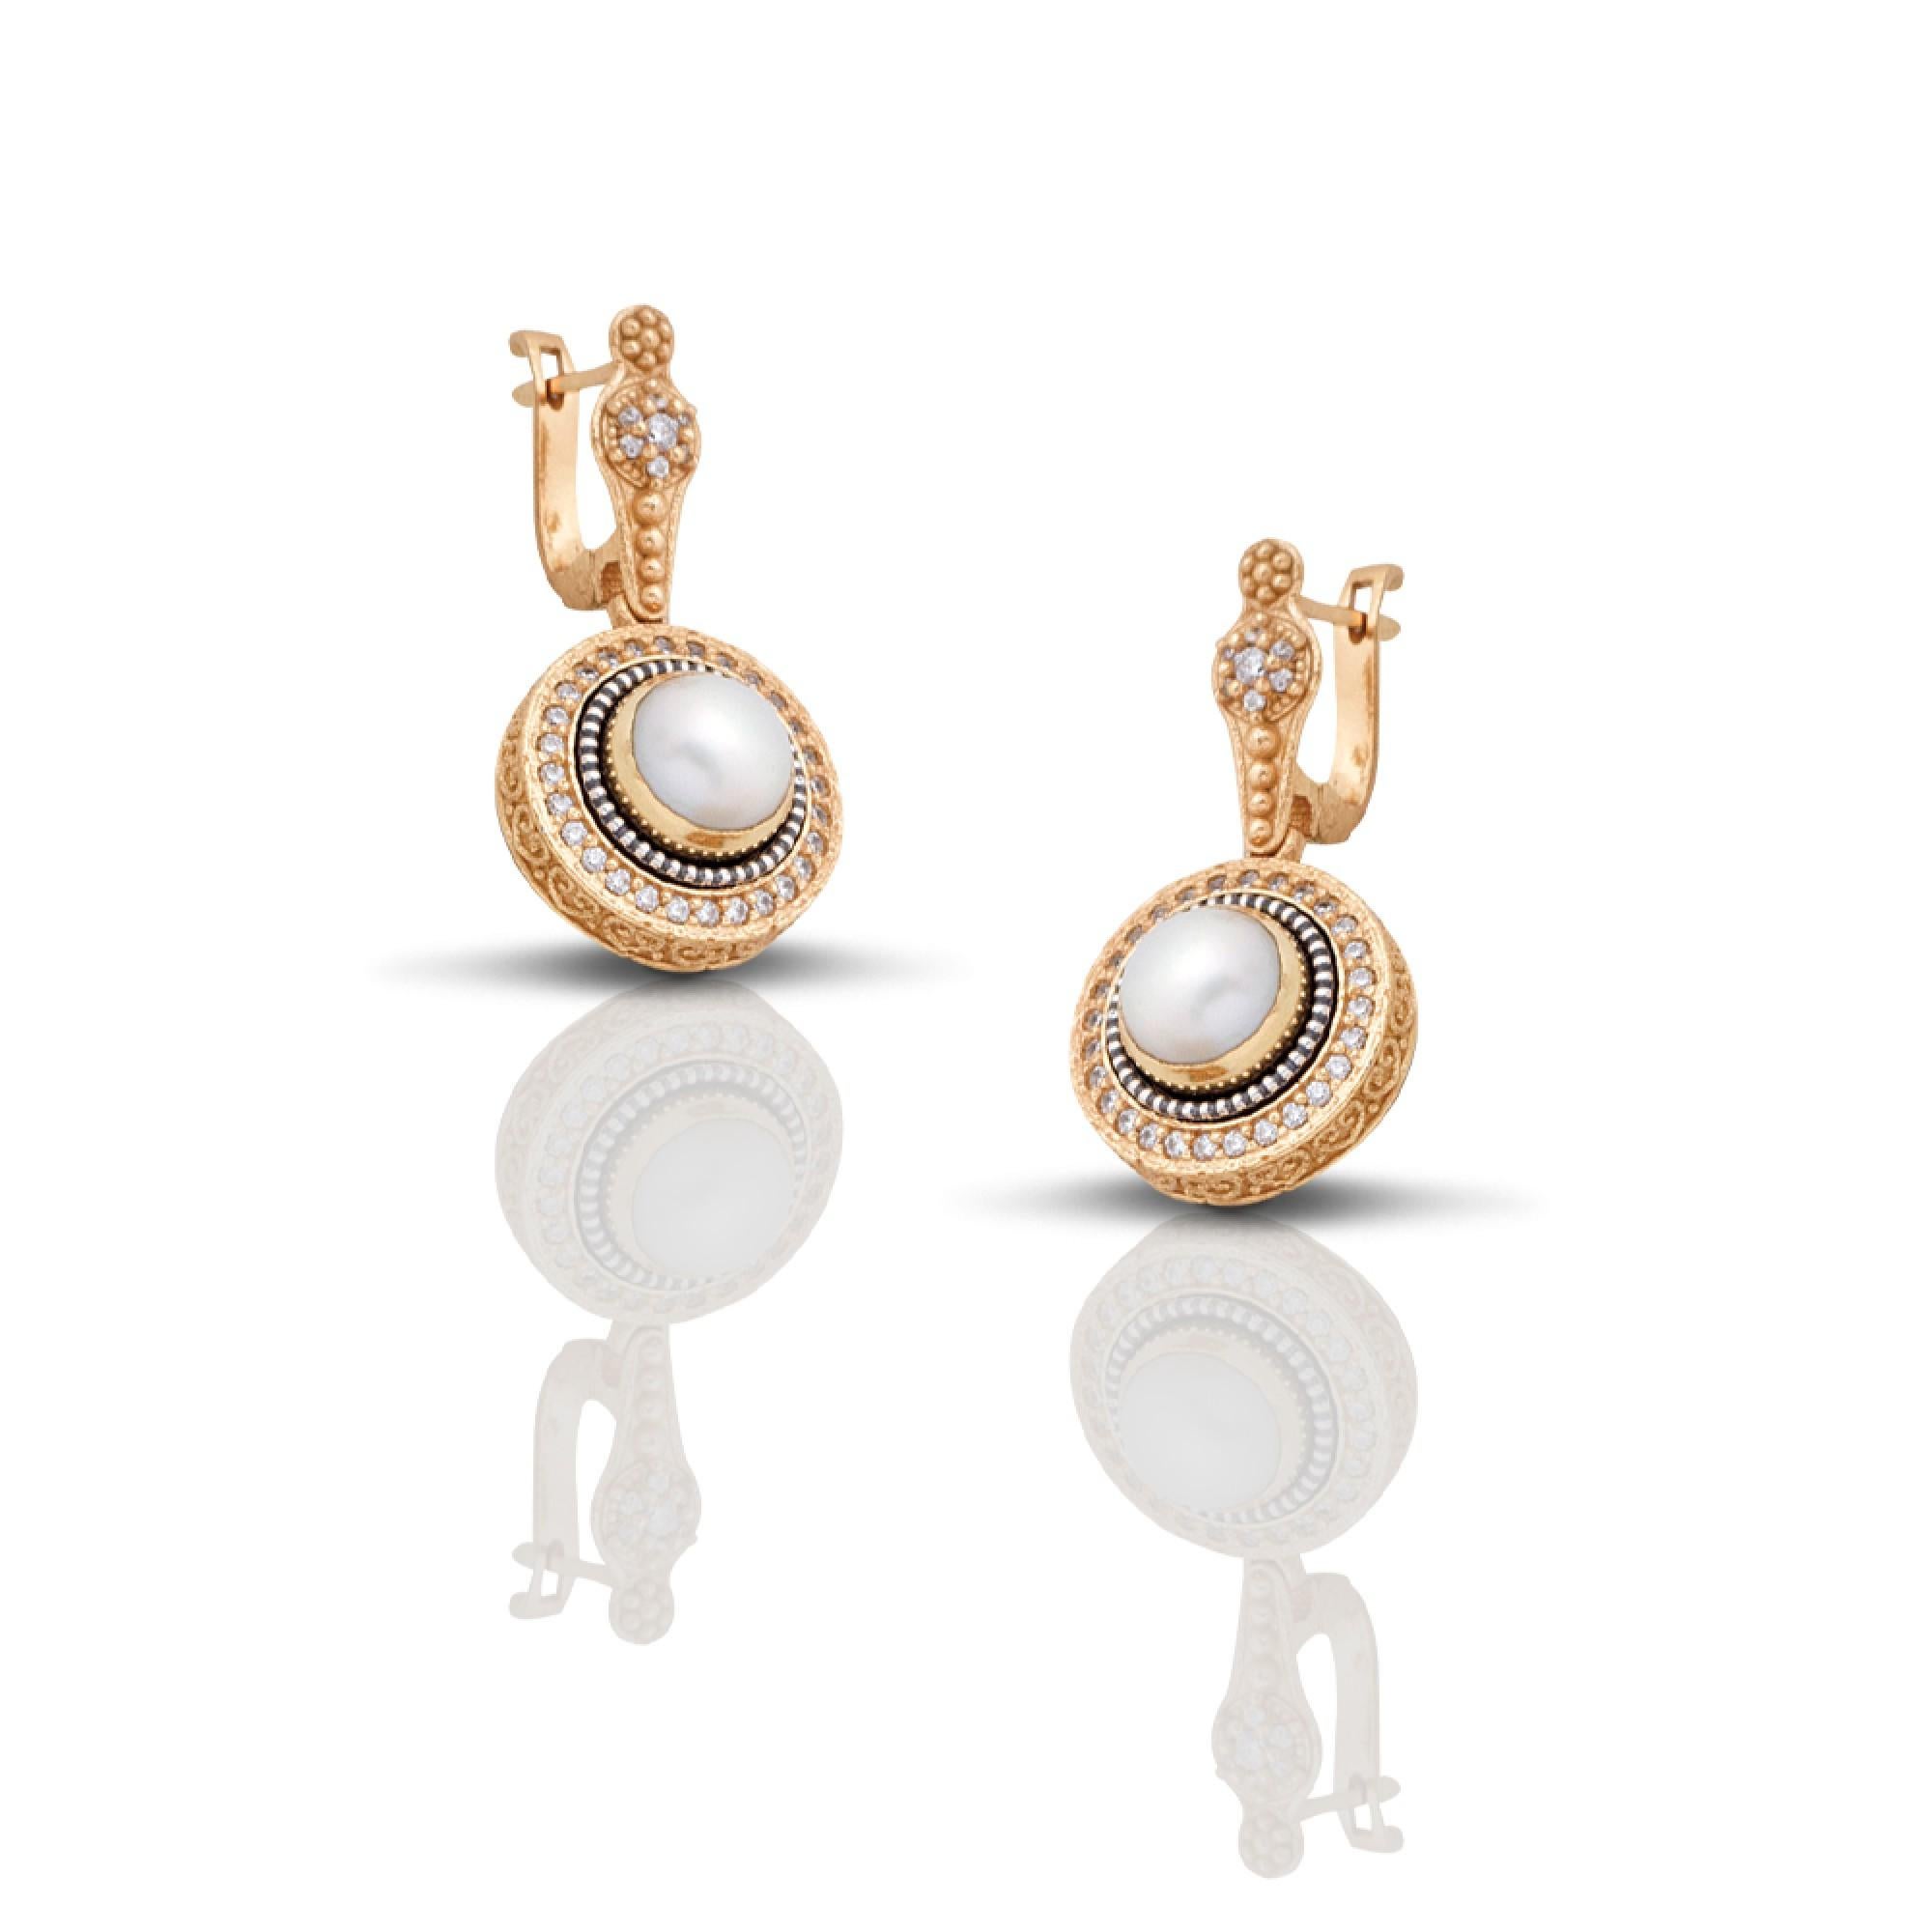 The pearl according to tradition is a symbol of marriage and helps the flow of love. It strengthens purity, faith in noble values, honesty, morality and charity. At a young age it symbolizes innocence and a pure heart. It is called the stone of